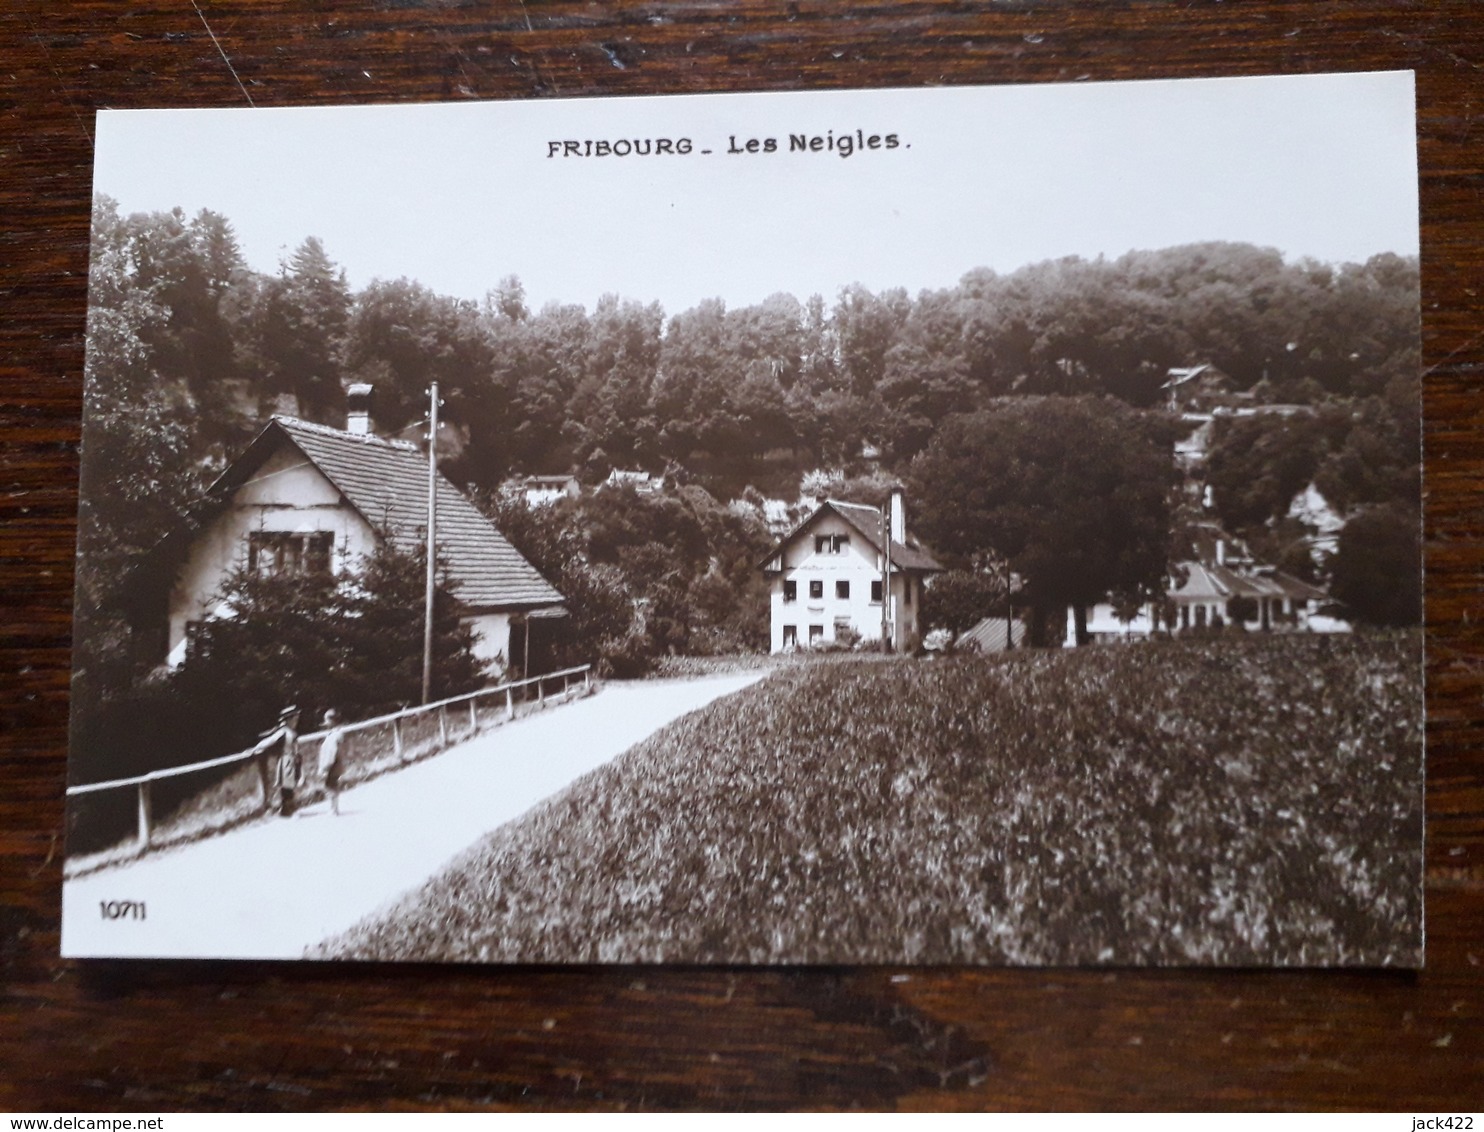 Suisse. Fribourg. Les Neigles - Fribourg